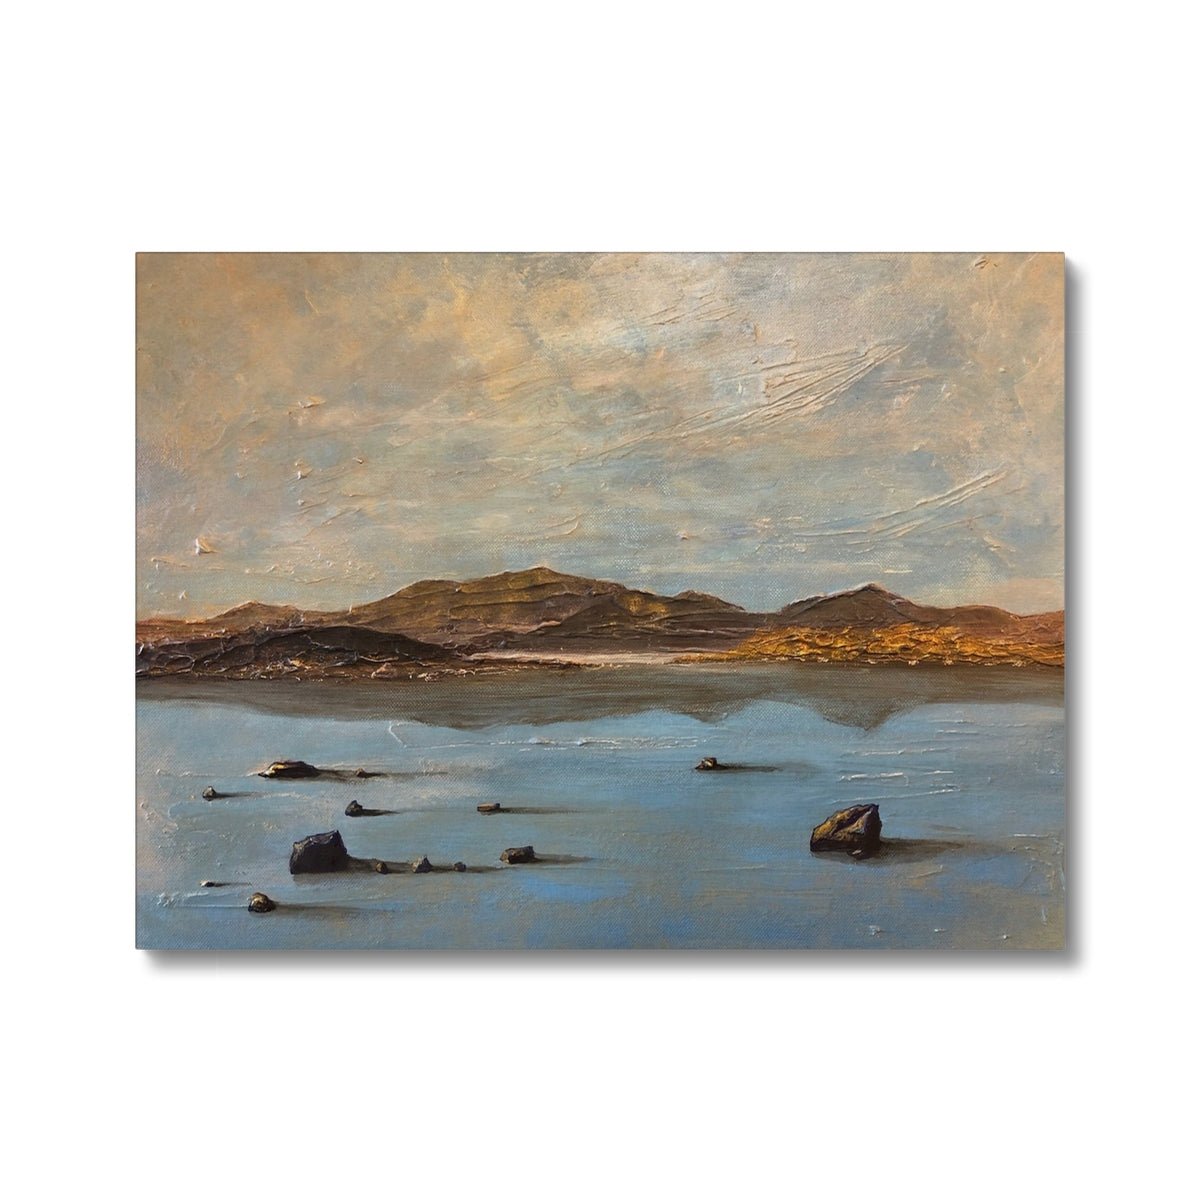 Loch Druidibeg South Uist Painting | Canvas From Scotland-Contemporary Stretched Canvas Prints-Scottish Lochs Art Gallery-24"x18"-Paintings, Prints, Homeware, Art Gifts From Scotland By Scottish Artist Kevin Hunter